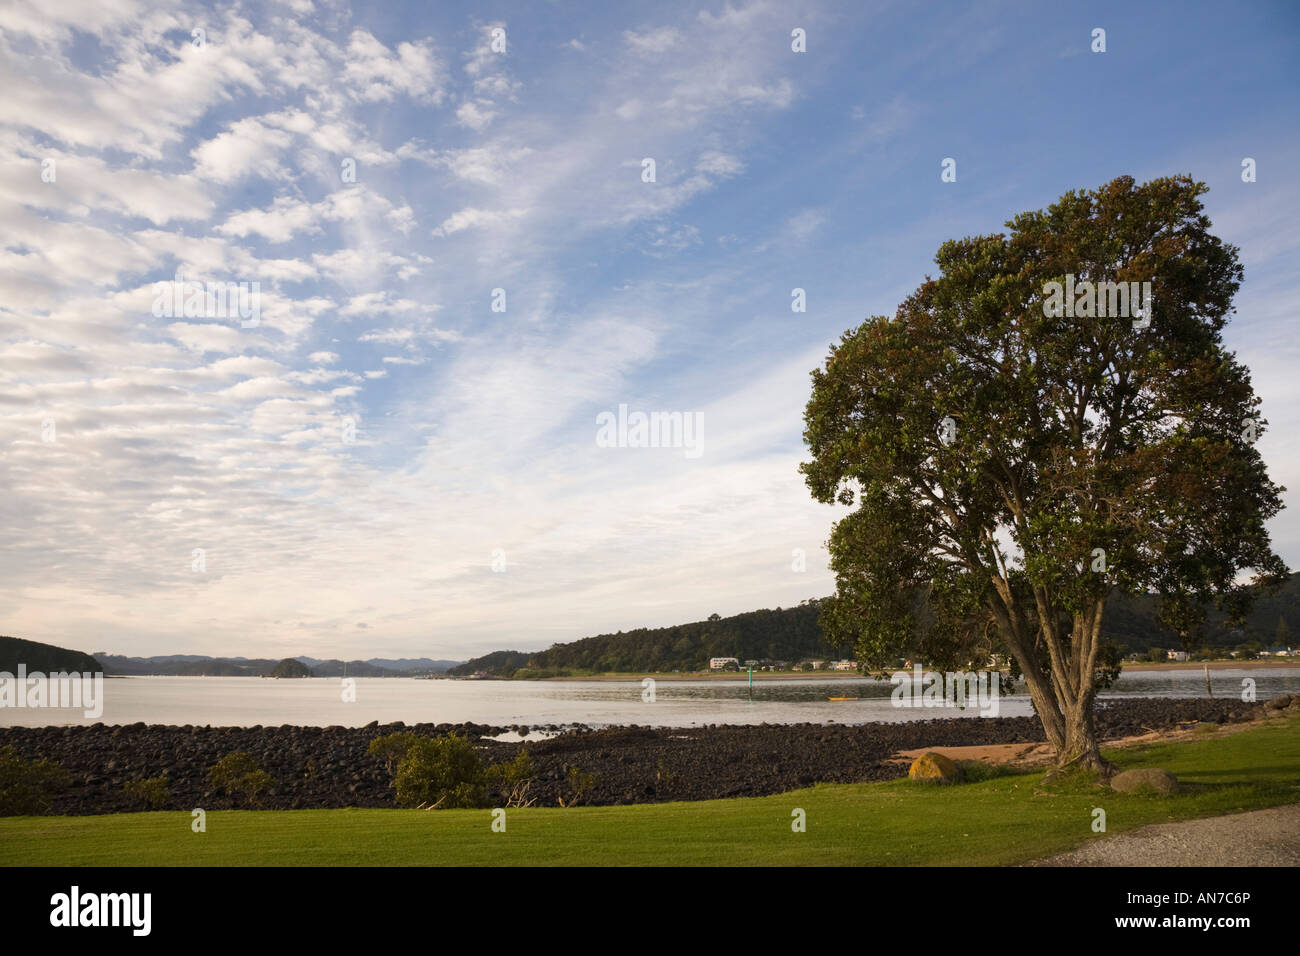 Shore with tree and coastal landscape view across calm sea water of Bay of Islands in early morning light Waitangi New Zealand Stock Photo